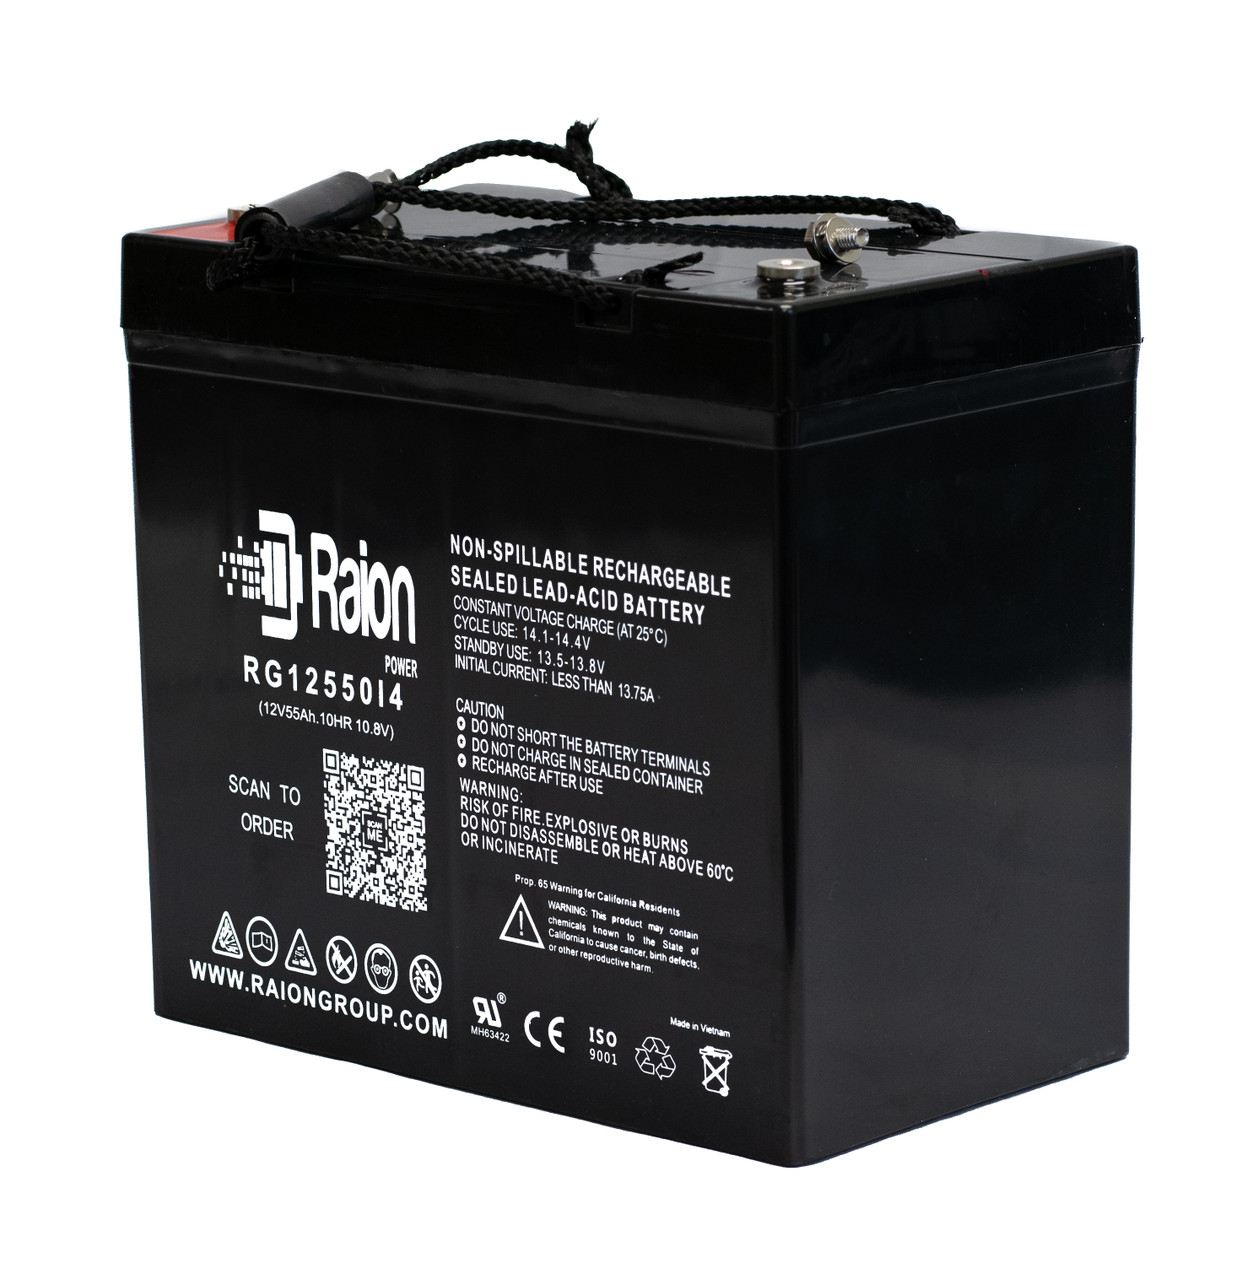 Raion Power 12V 55Ah 22NF Mobility Scooter Battery Replacement for Fortress Scooters Winner 4 Wheel